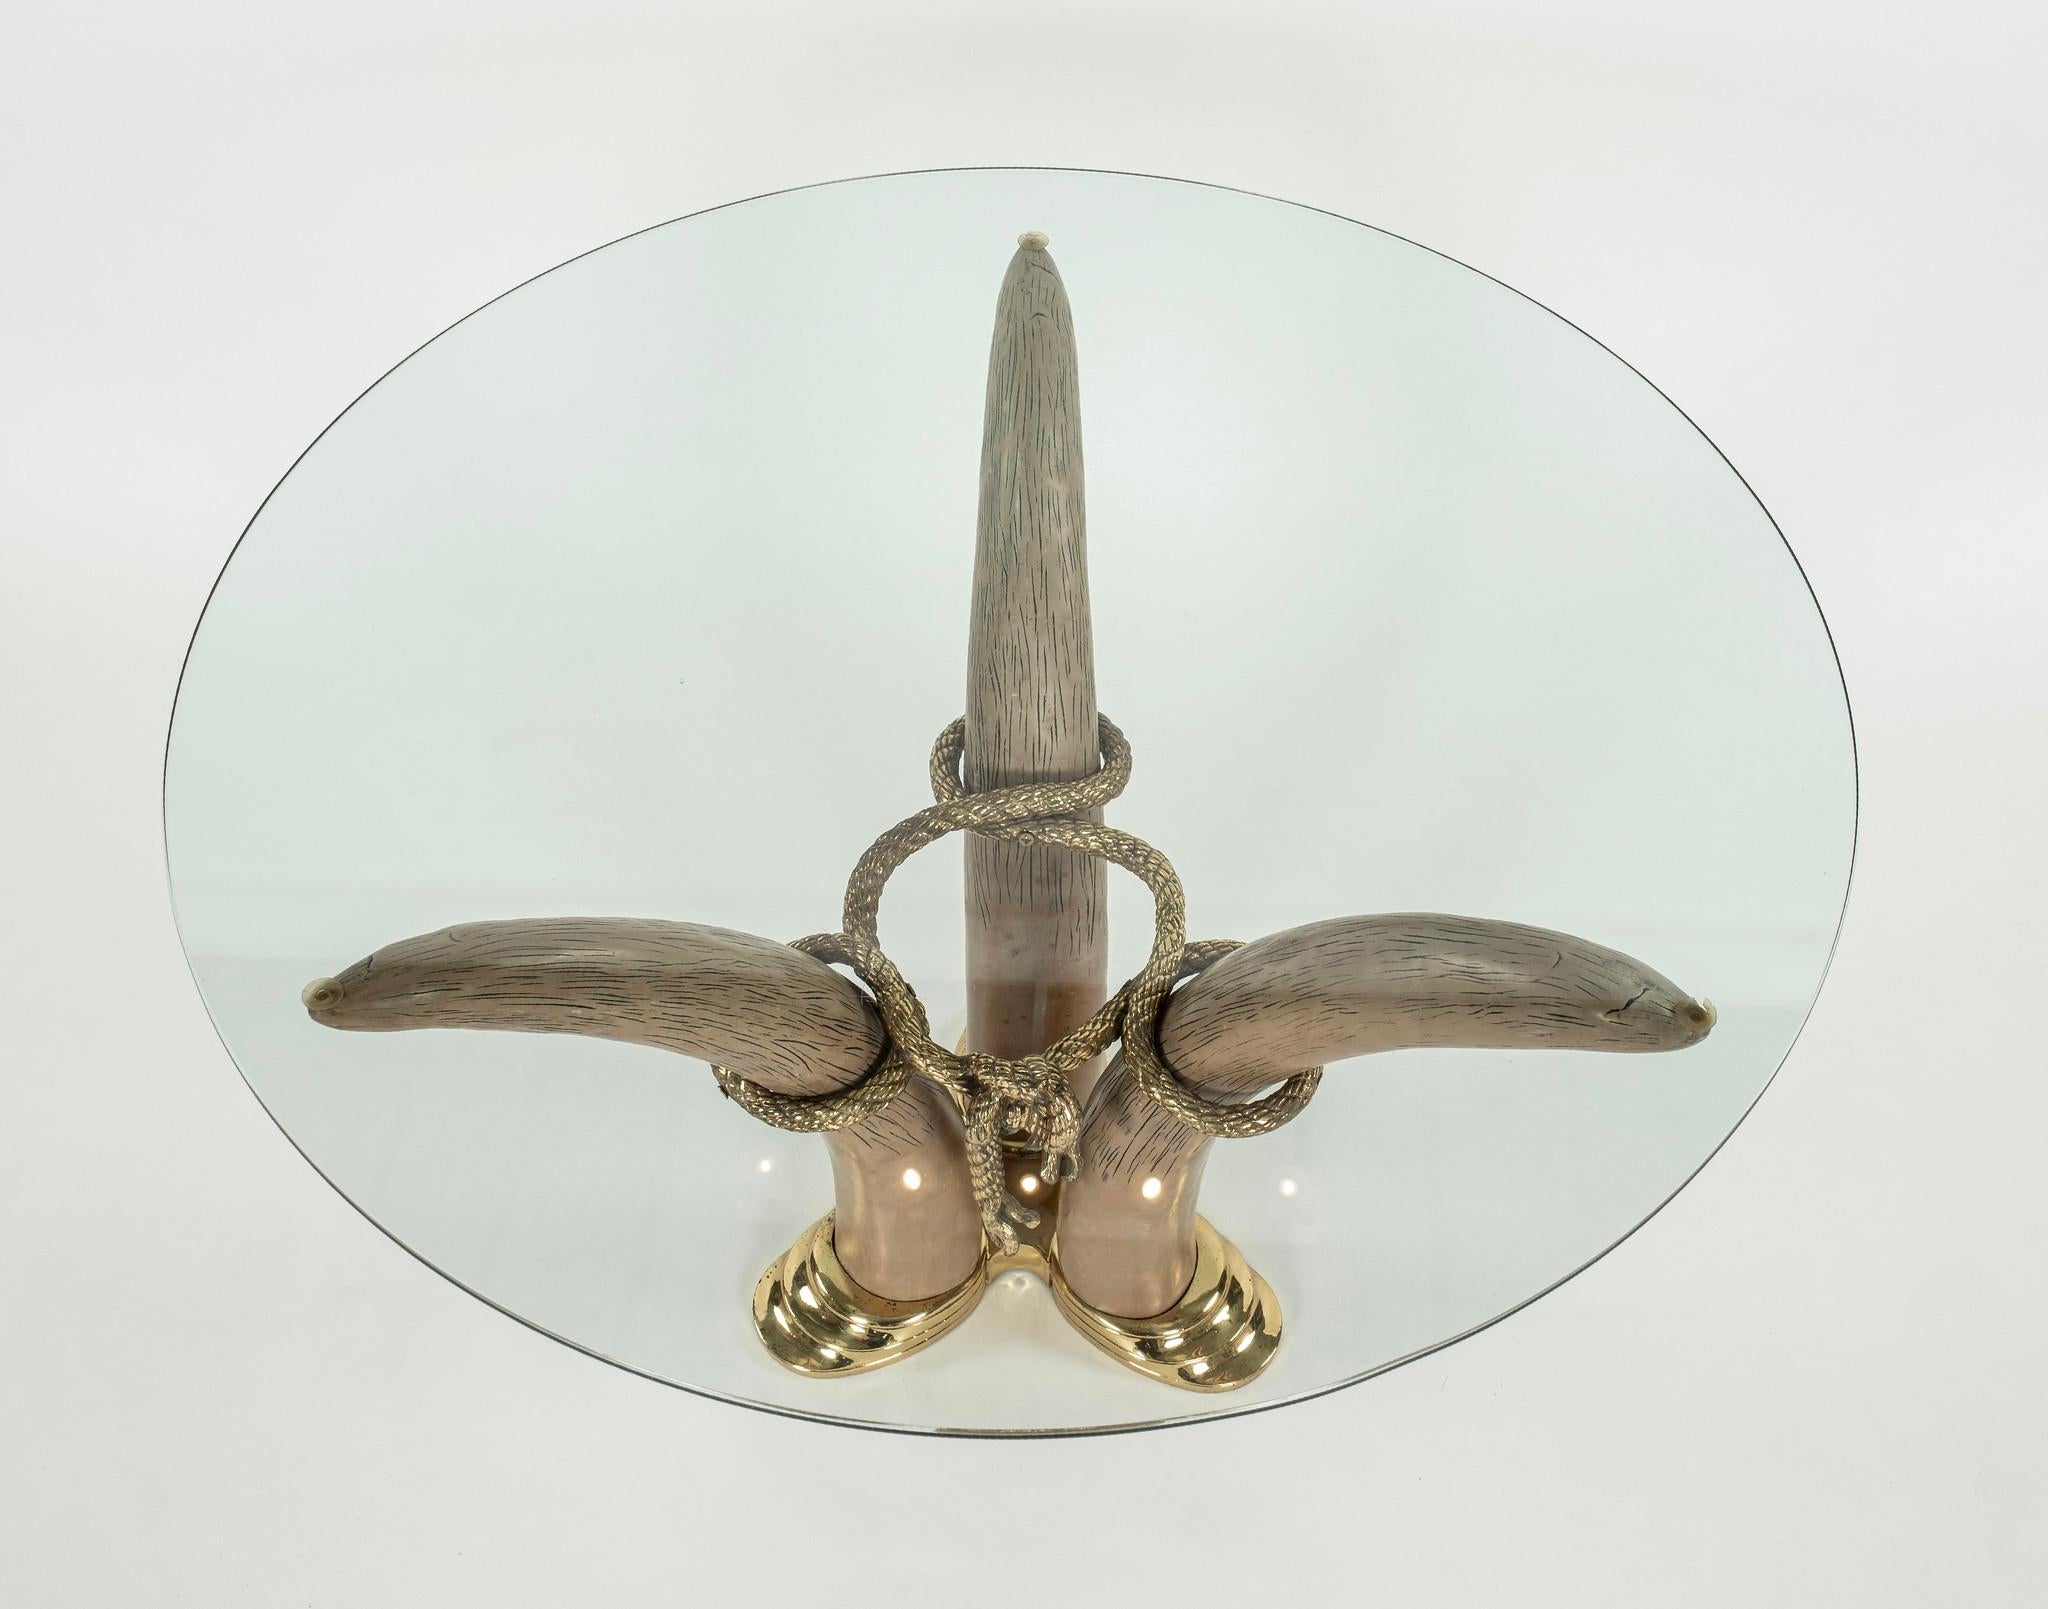 Spanish Italo Valenti Faux Tusk Brass Occasional Glass Table For Sale